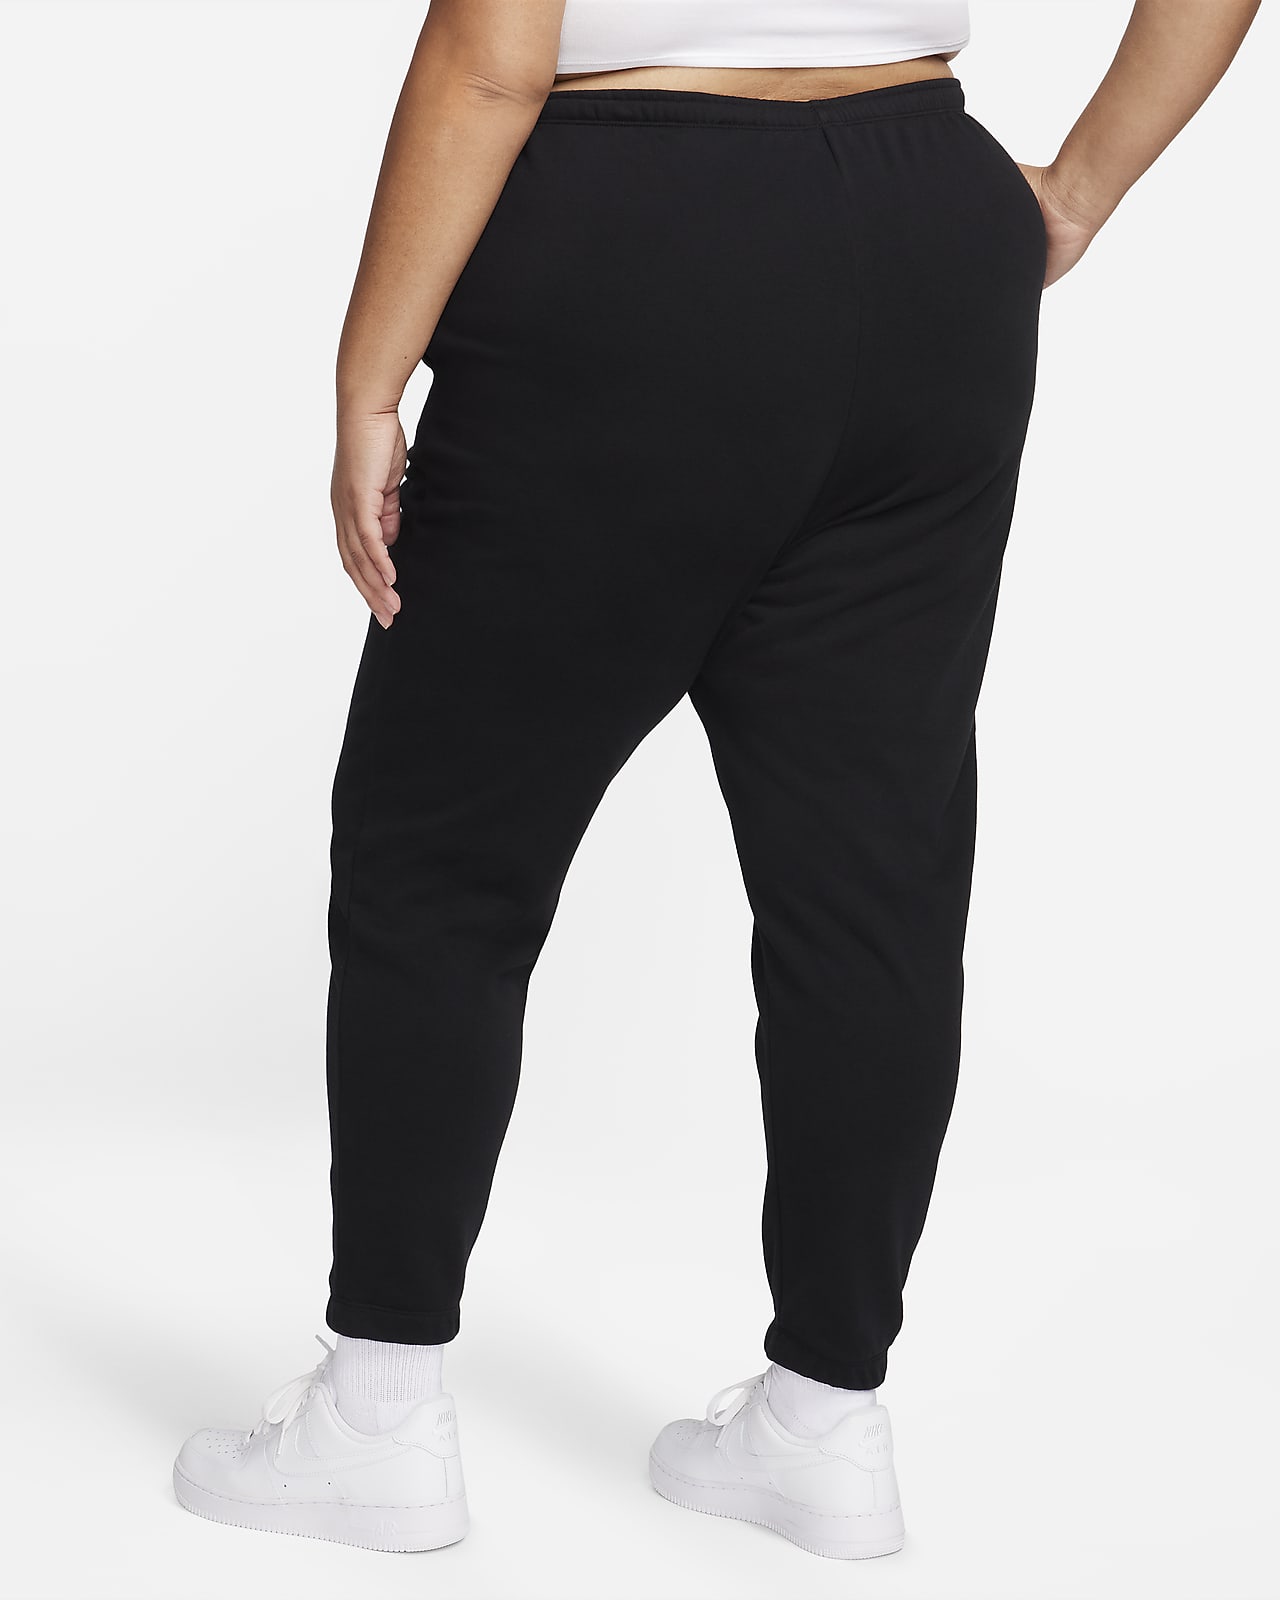 NIKE SPORTSWEAR CHILL TERRY WOMEN'S SLIM HIGH-WAISTED FRENCH TERRY